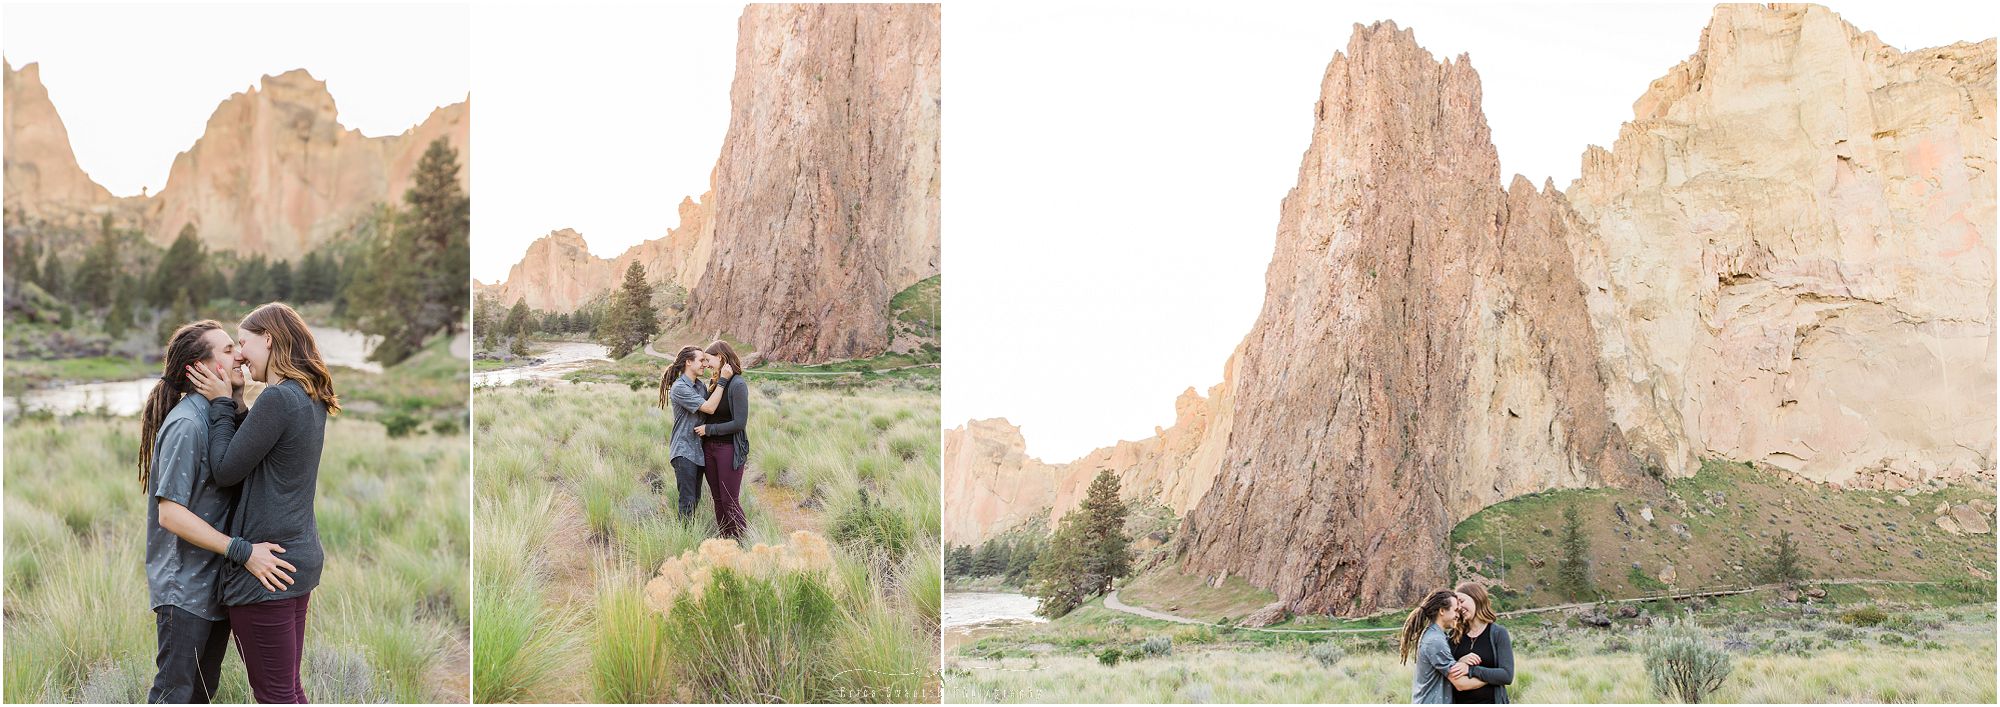 Gorgeous light at this Smith Rock Engagement Session. | Erica Swantek Photography